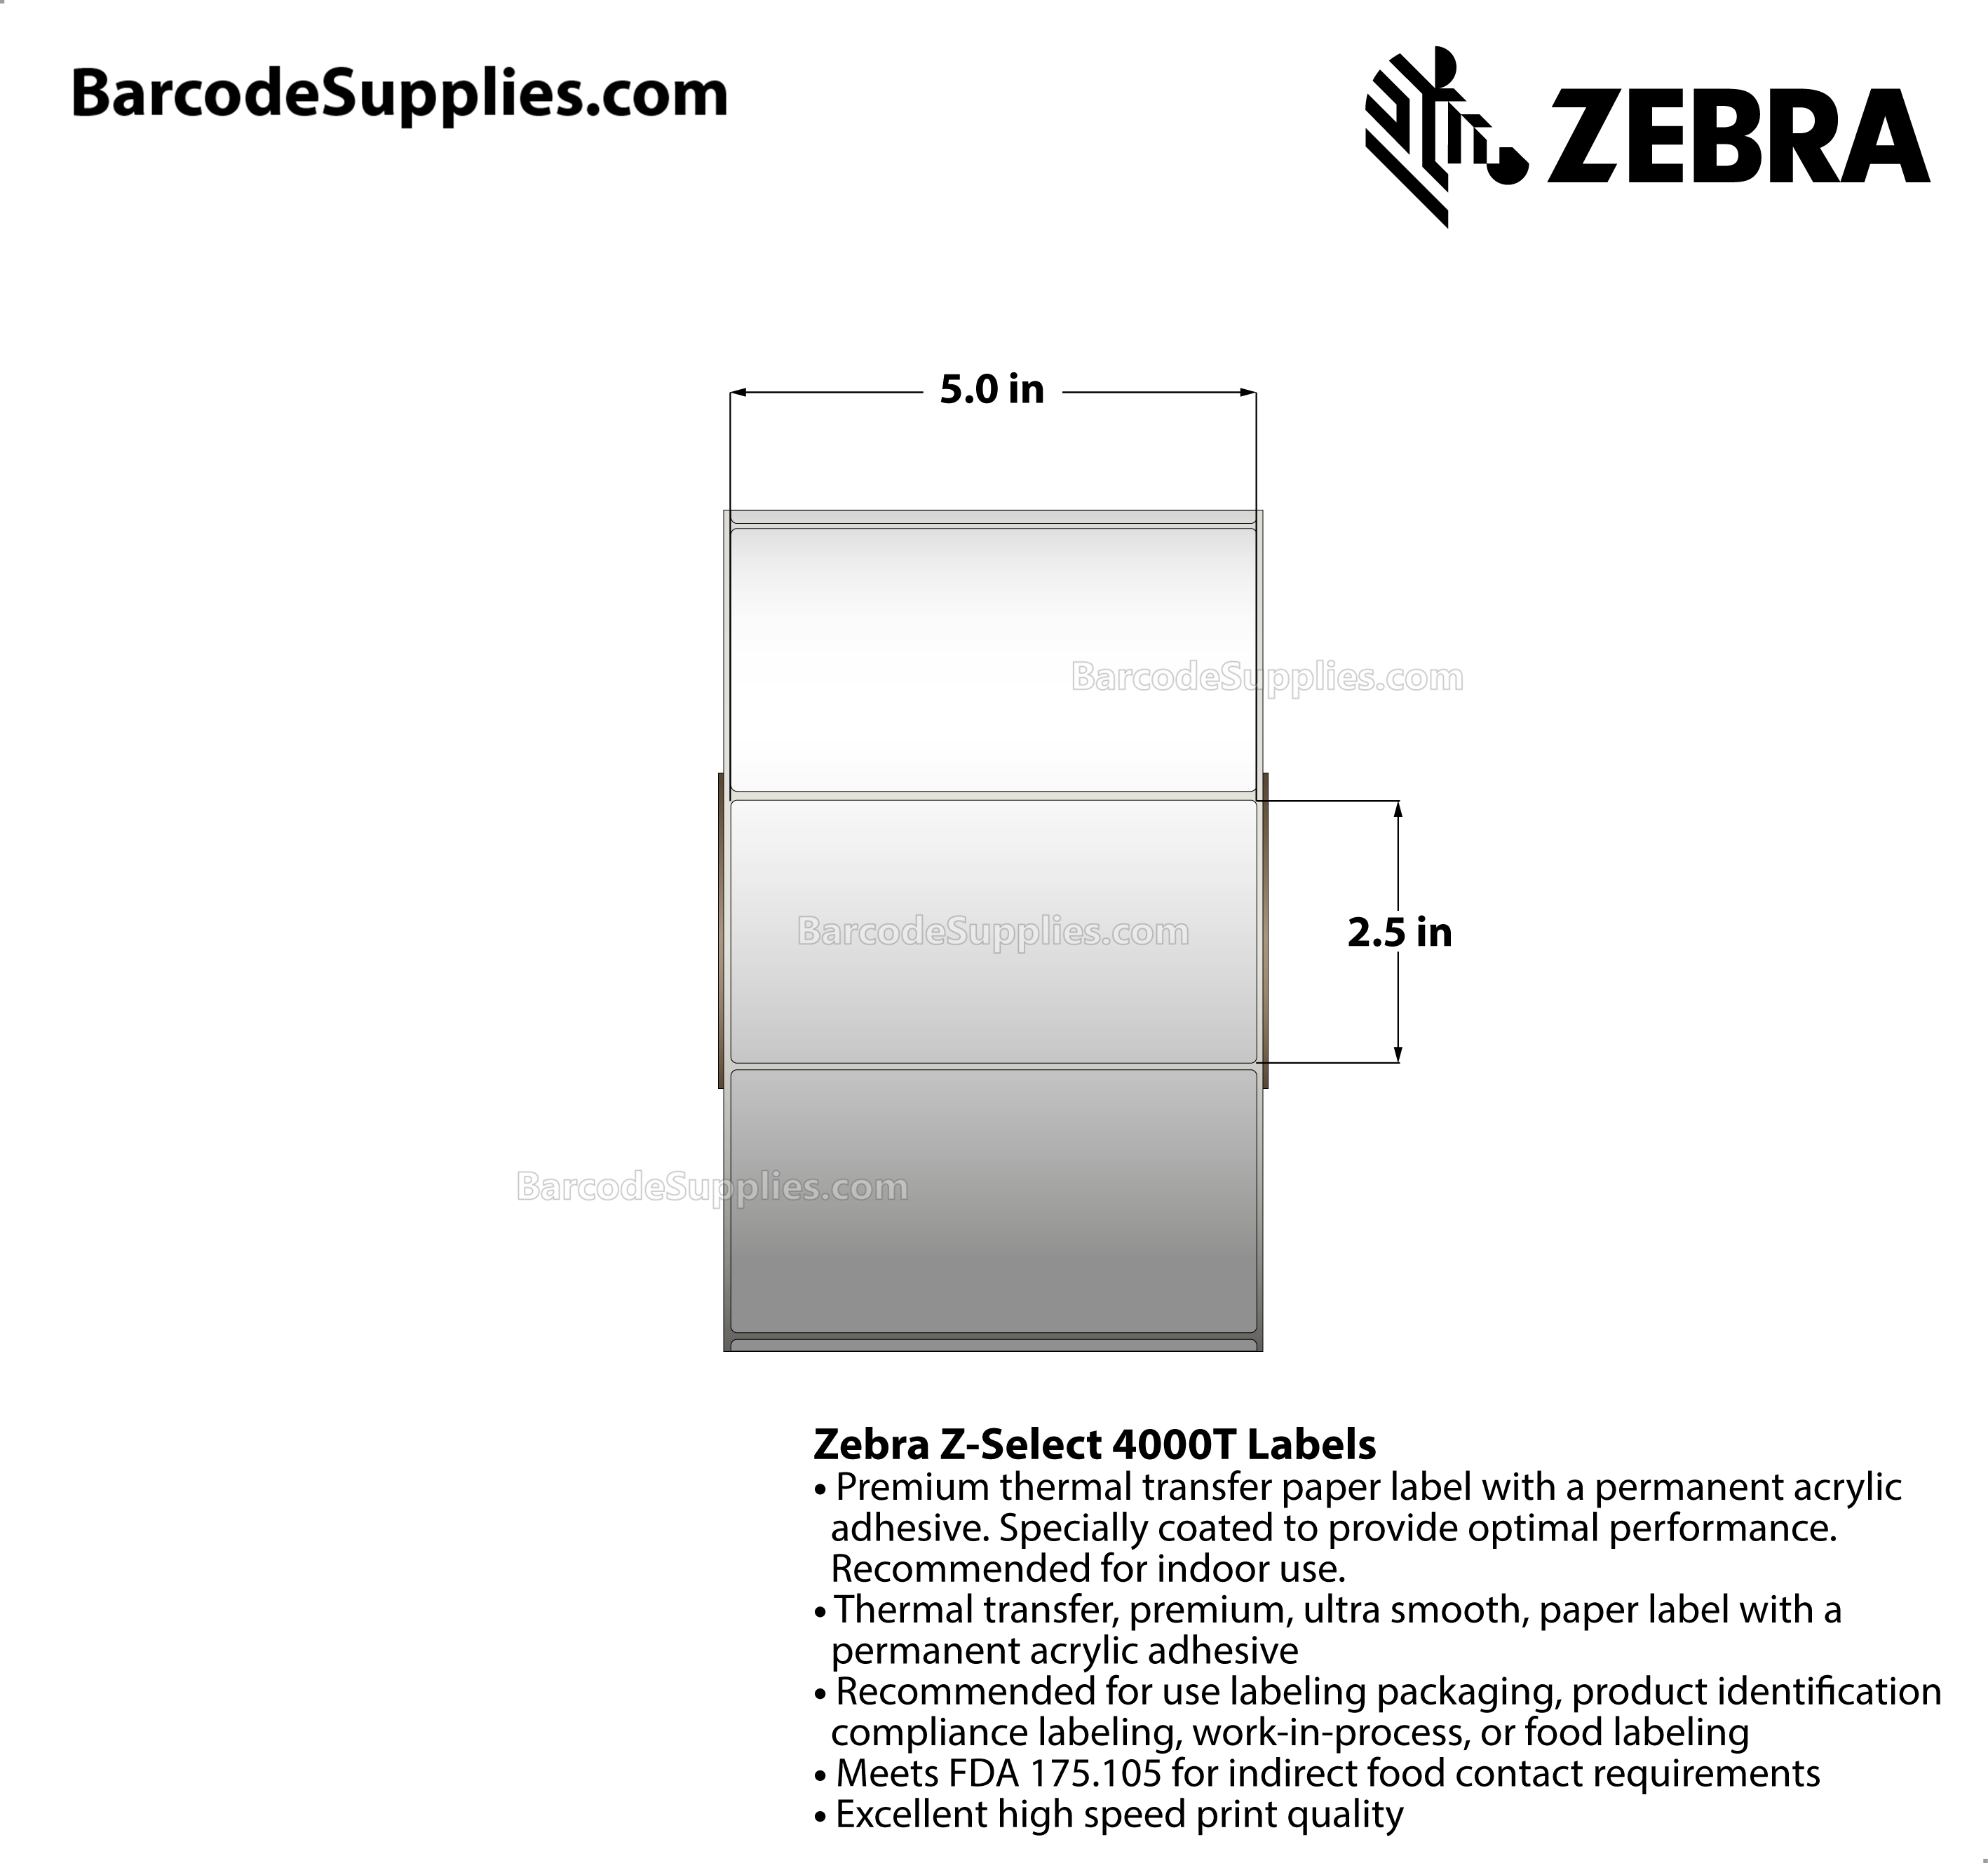 5 x 2.5 Thermal Transfer White Z-Select 4000T Labels With Permanent Adhesive - Not Perforated - 2220 Labels Per Roll - Carton Of 4 Rolls - 8880 Labels Total - MPN: 72298